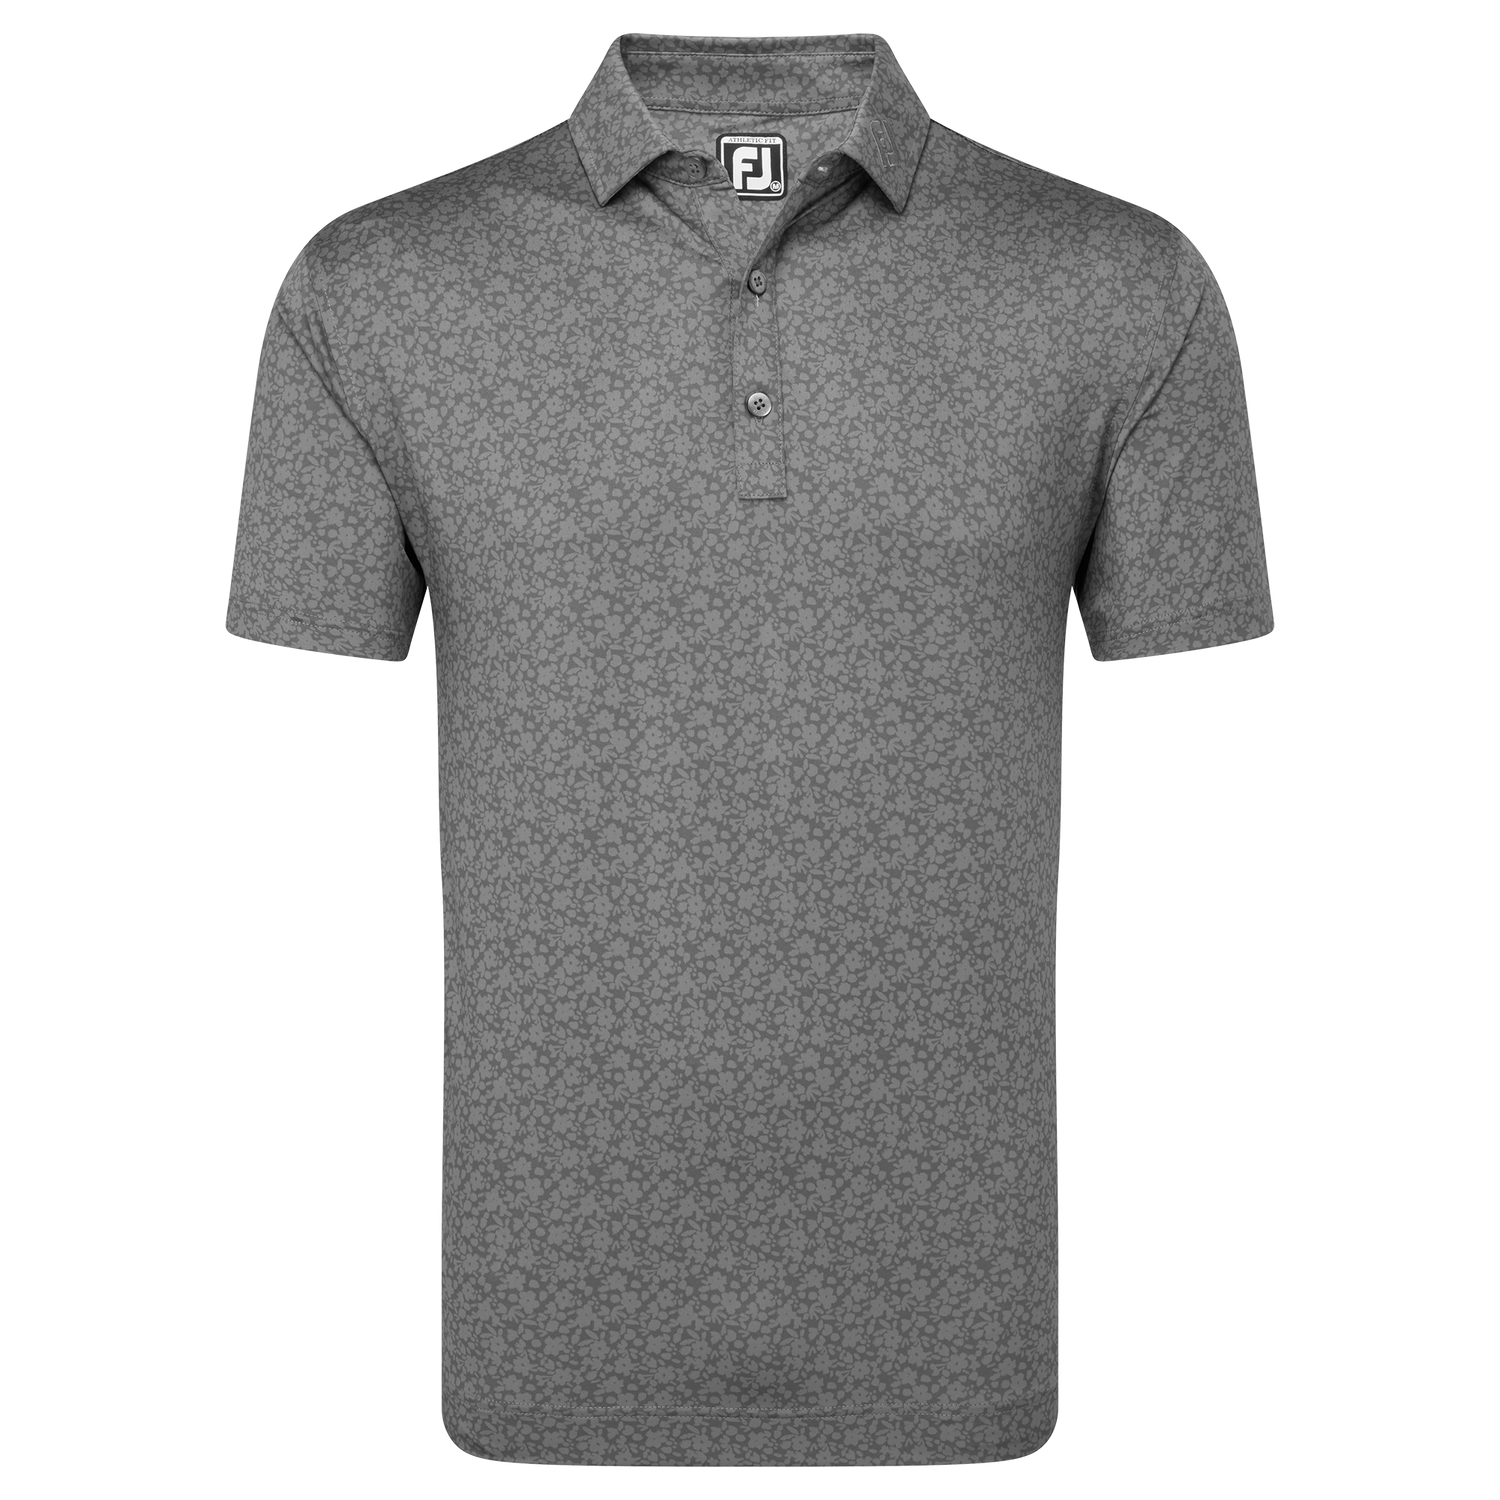 FootJoy Golf Painted Floral Polo Shirt 81622 Gravel M 